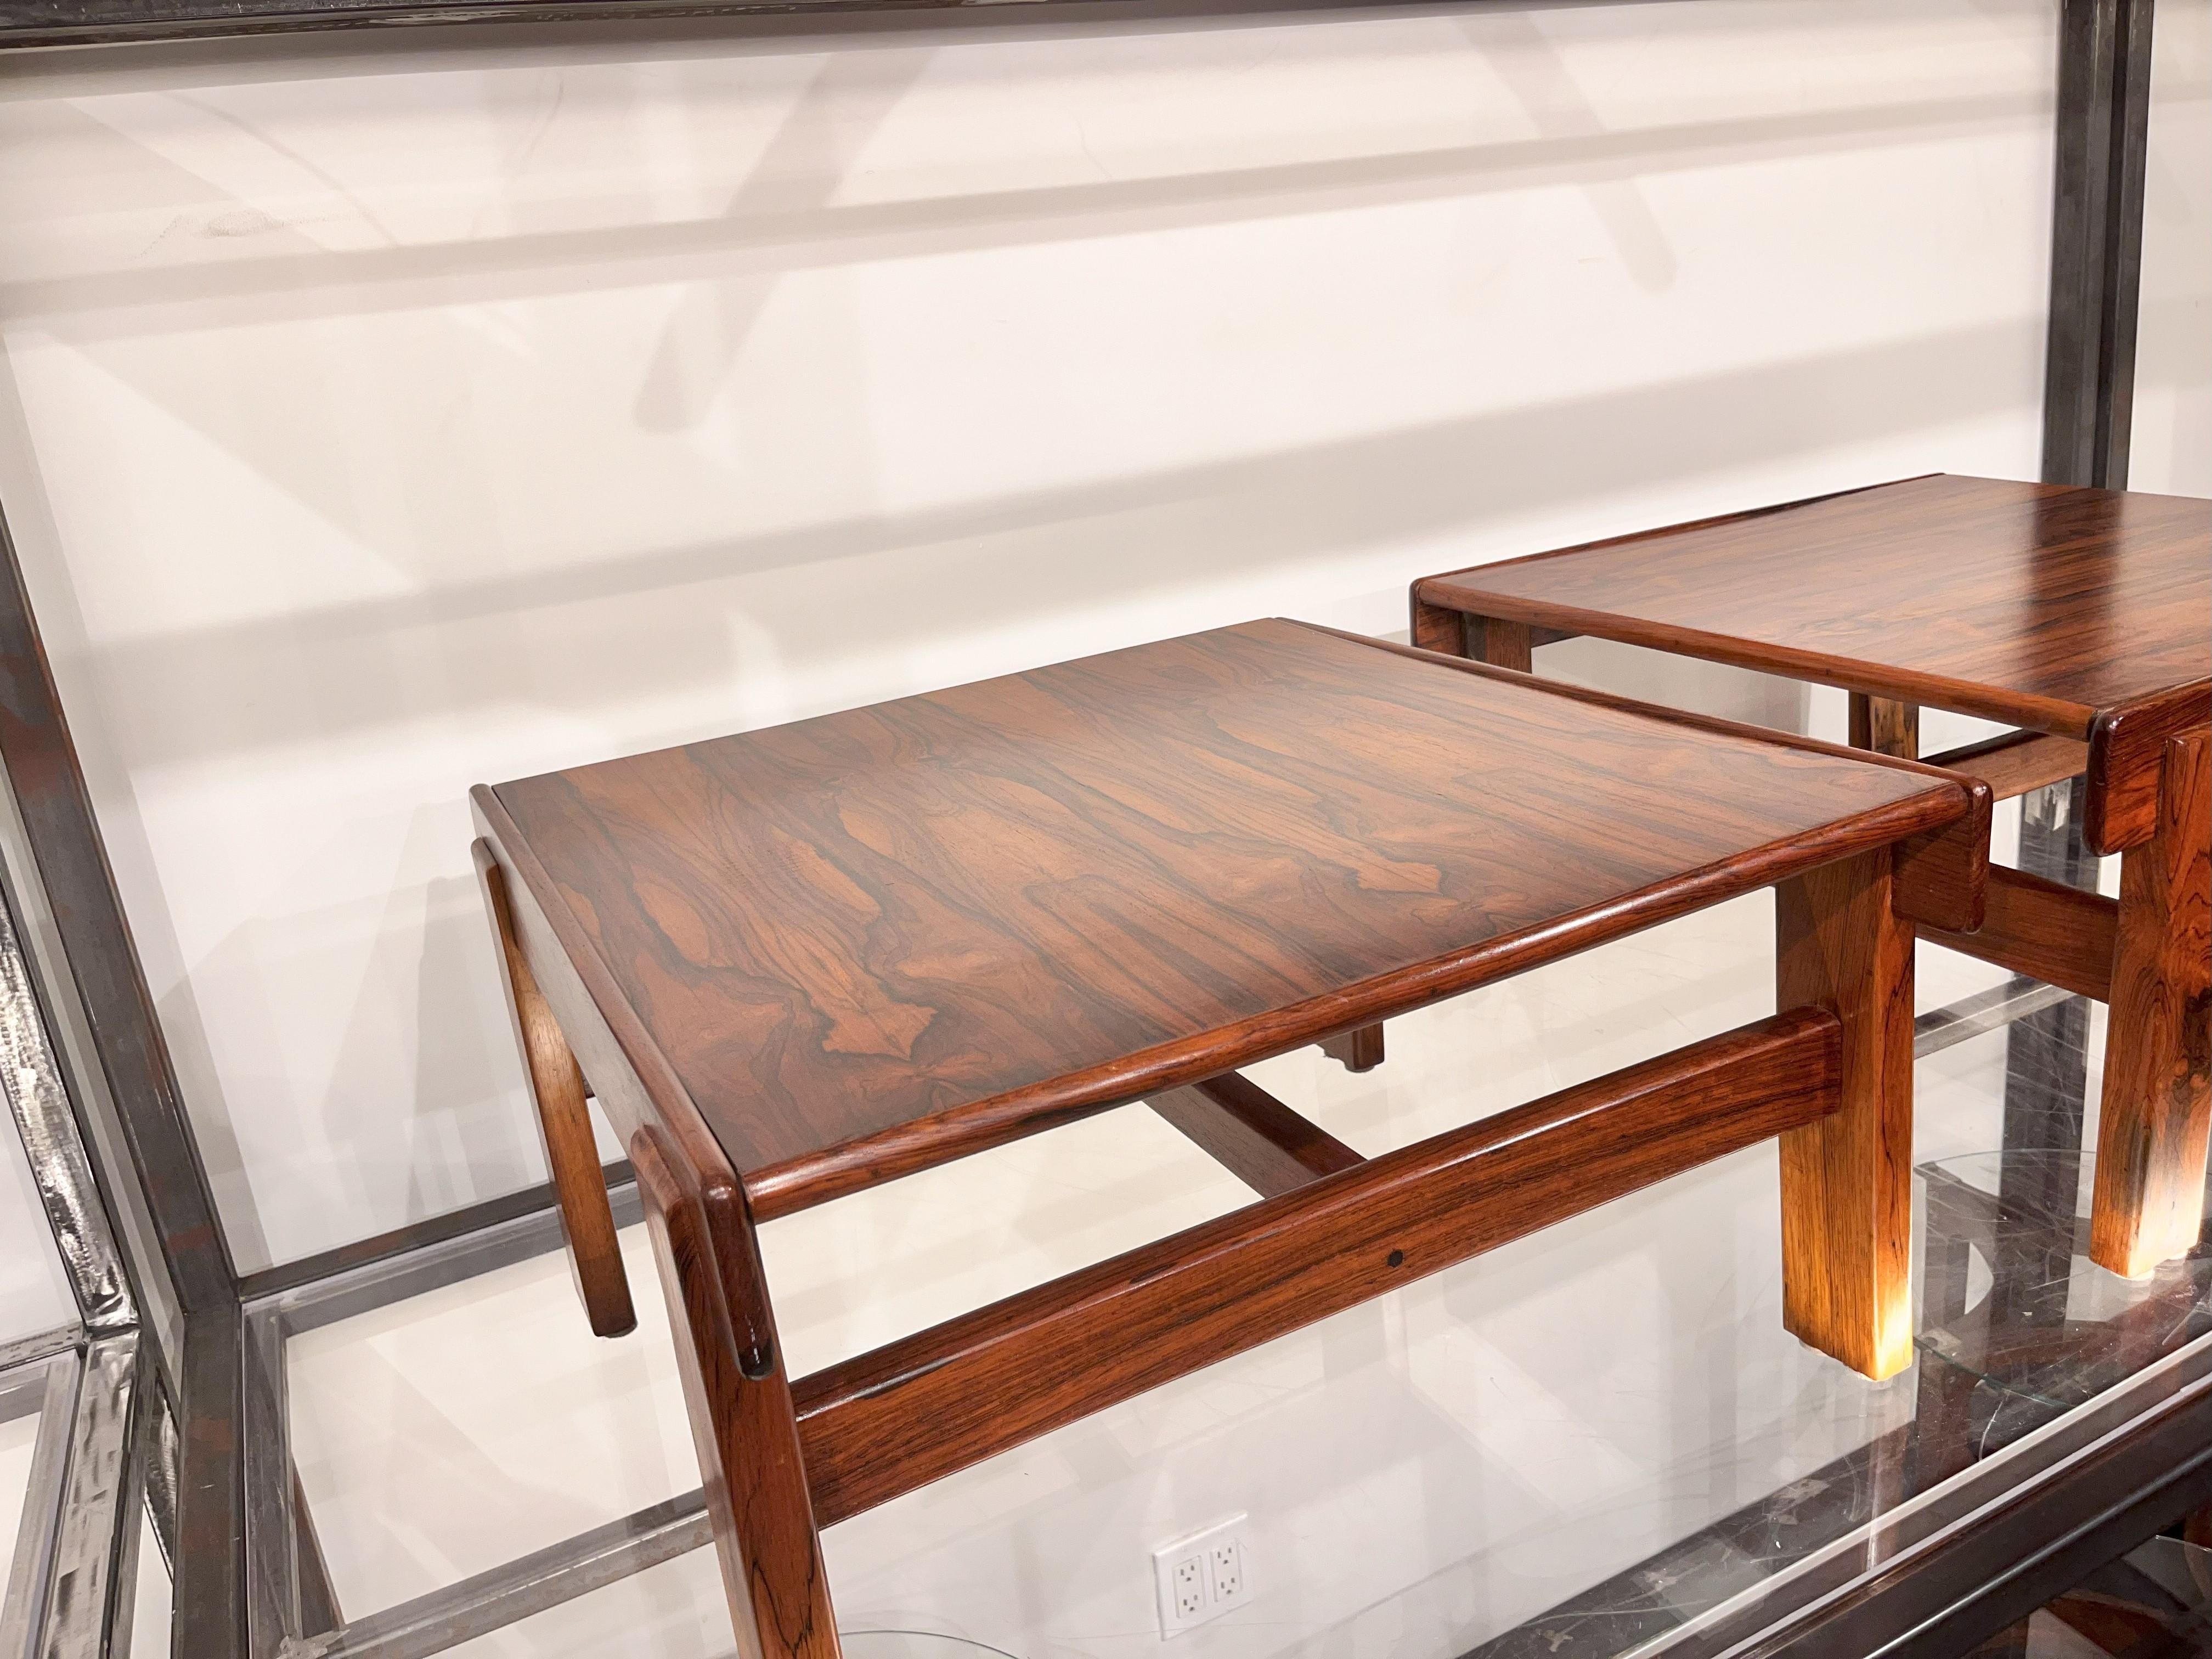 South American Midcentury Modern Side Table set in Hardwood by Jean Gillon, 1960s For Sale